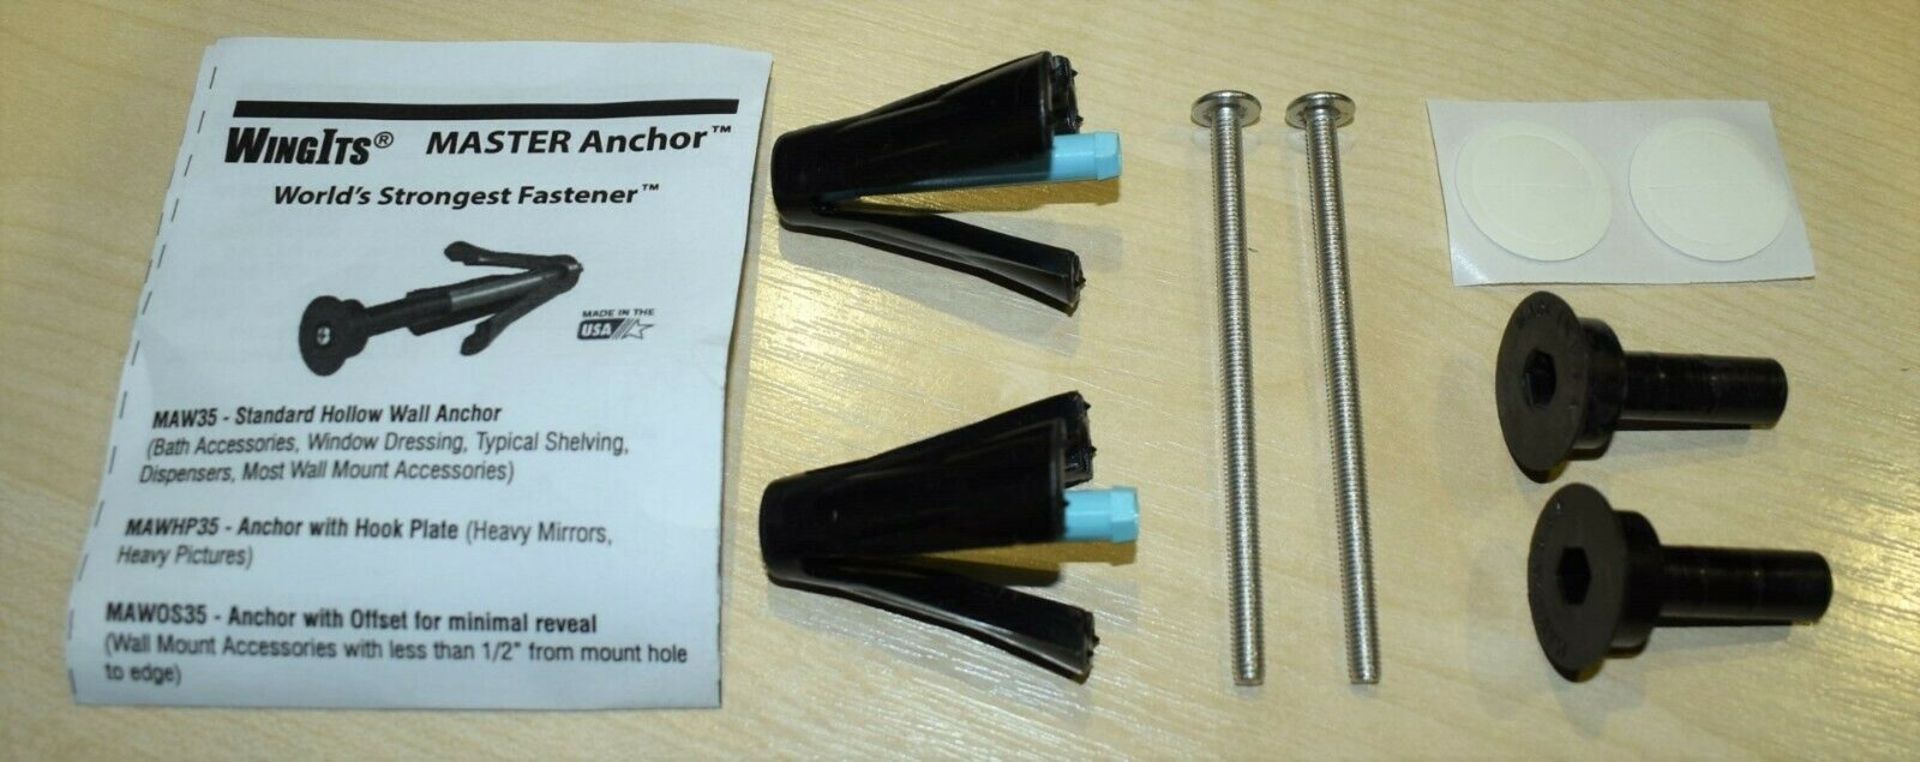 400 x Packs of WingIts Master Anchor Super Duty With Offset Drywall Fasteners - Brand New Stock - - Image 5 of 5